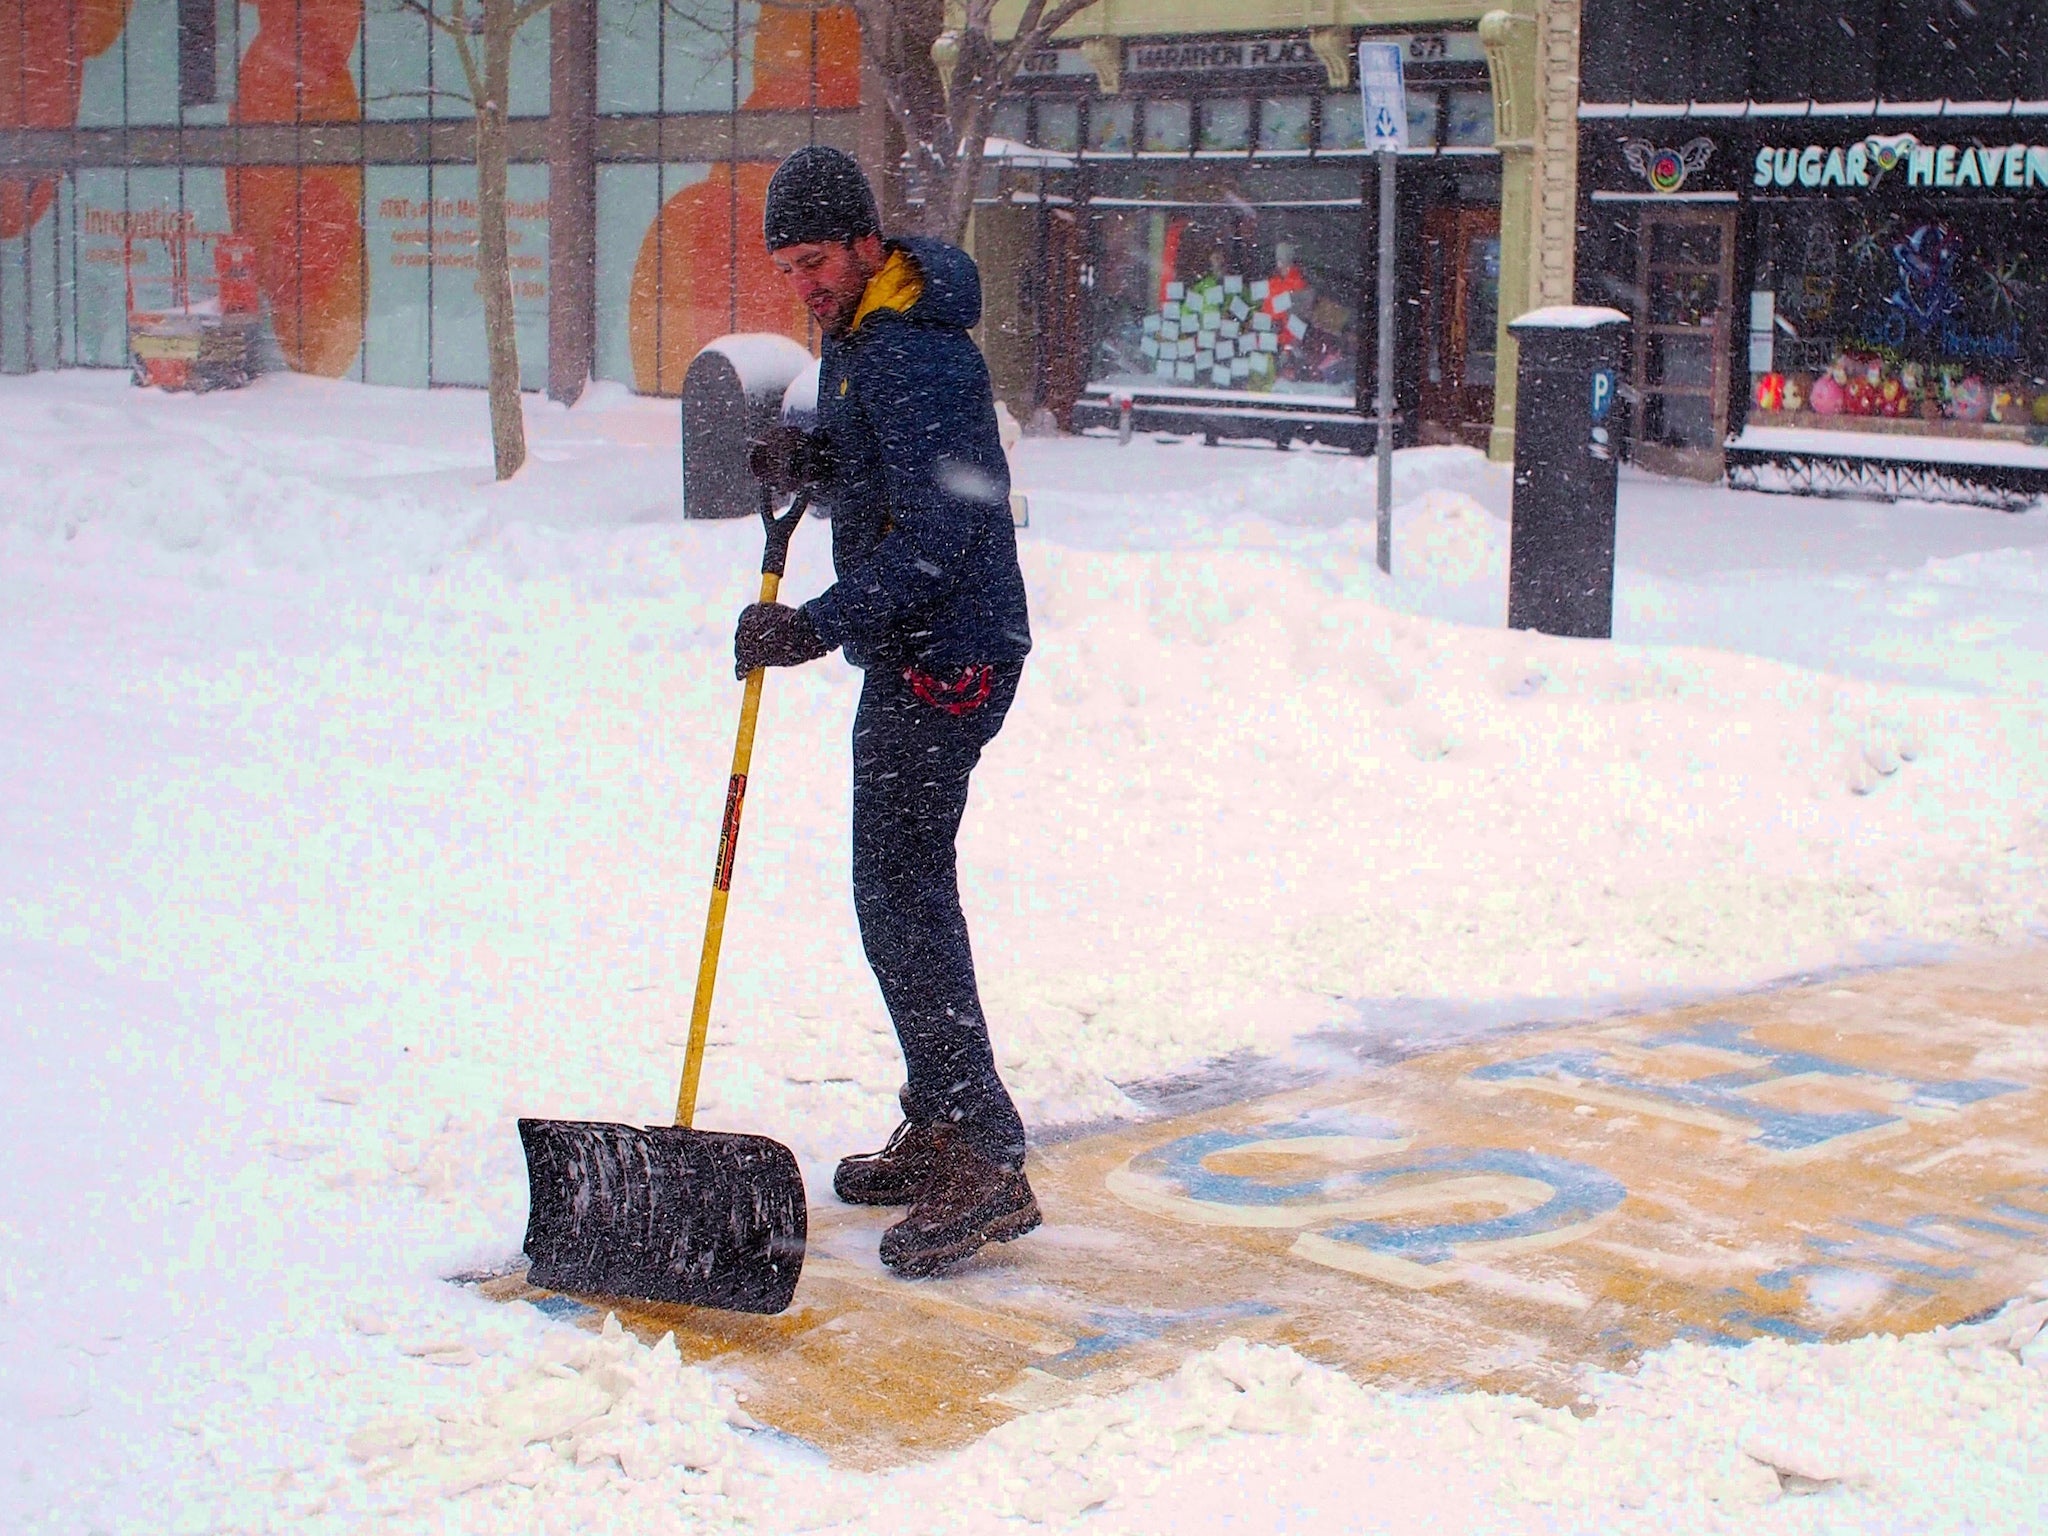 Chris Laudani cleared snow from the finishing line of the Boston Marathon